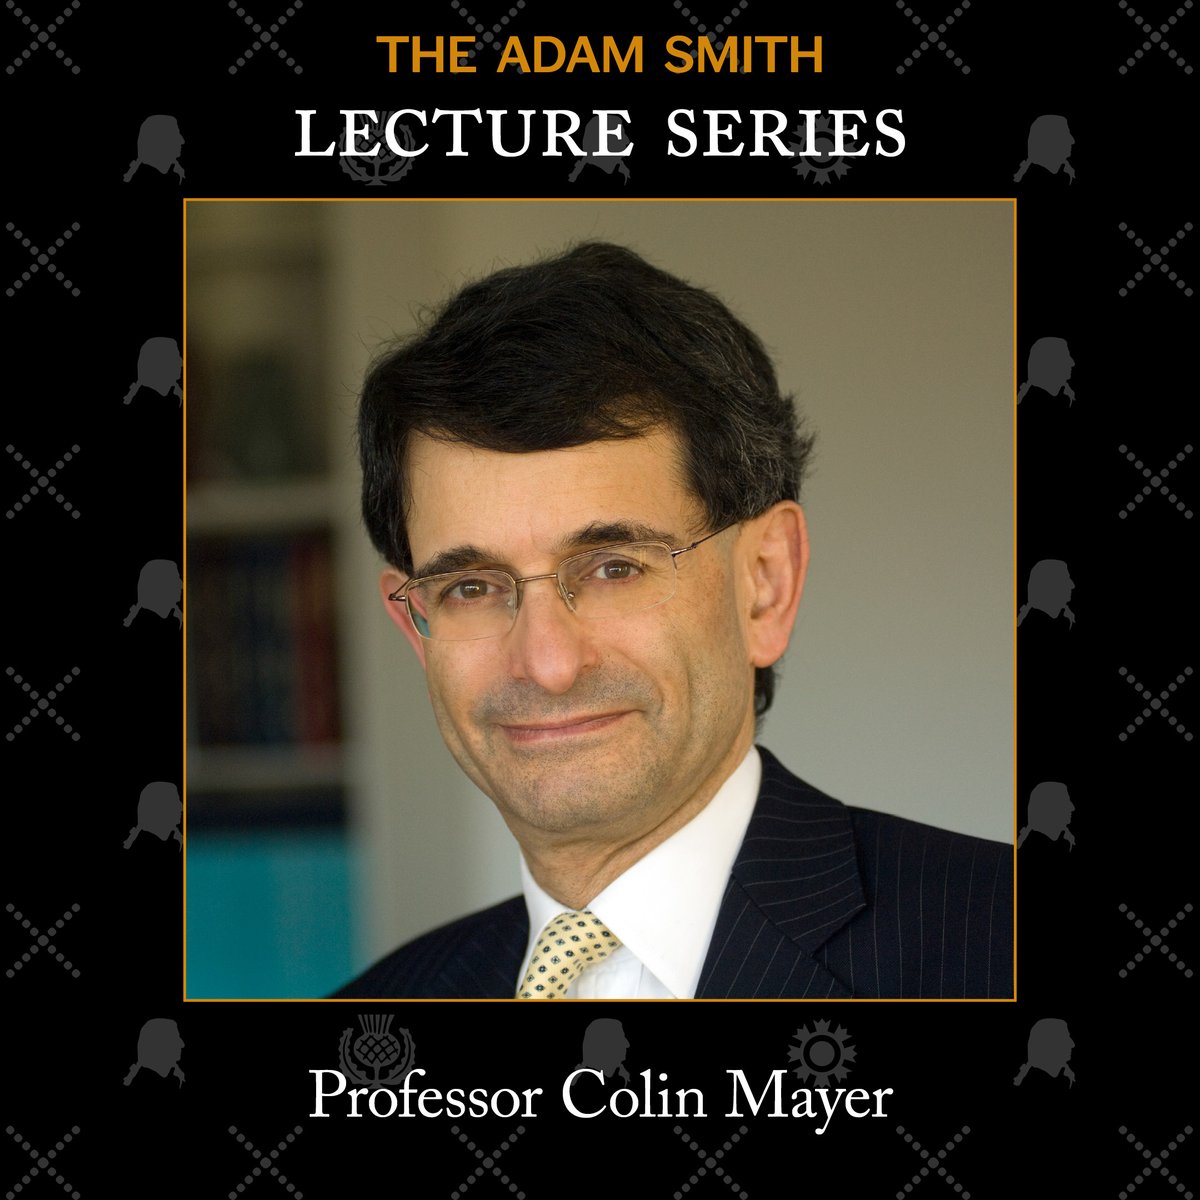 Our next ASLS speaker is Professor Colin Mayer, who, in his new book 'Capitalism and Crises', highlights the world's encounter with multiple crises: climate change, droughts, floods, energy, food, and pandemics. Register for the livestream on the 13 June: bit.ly/49pGCmH